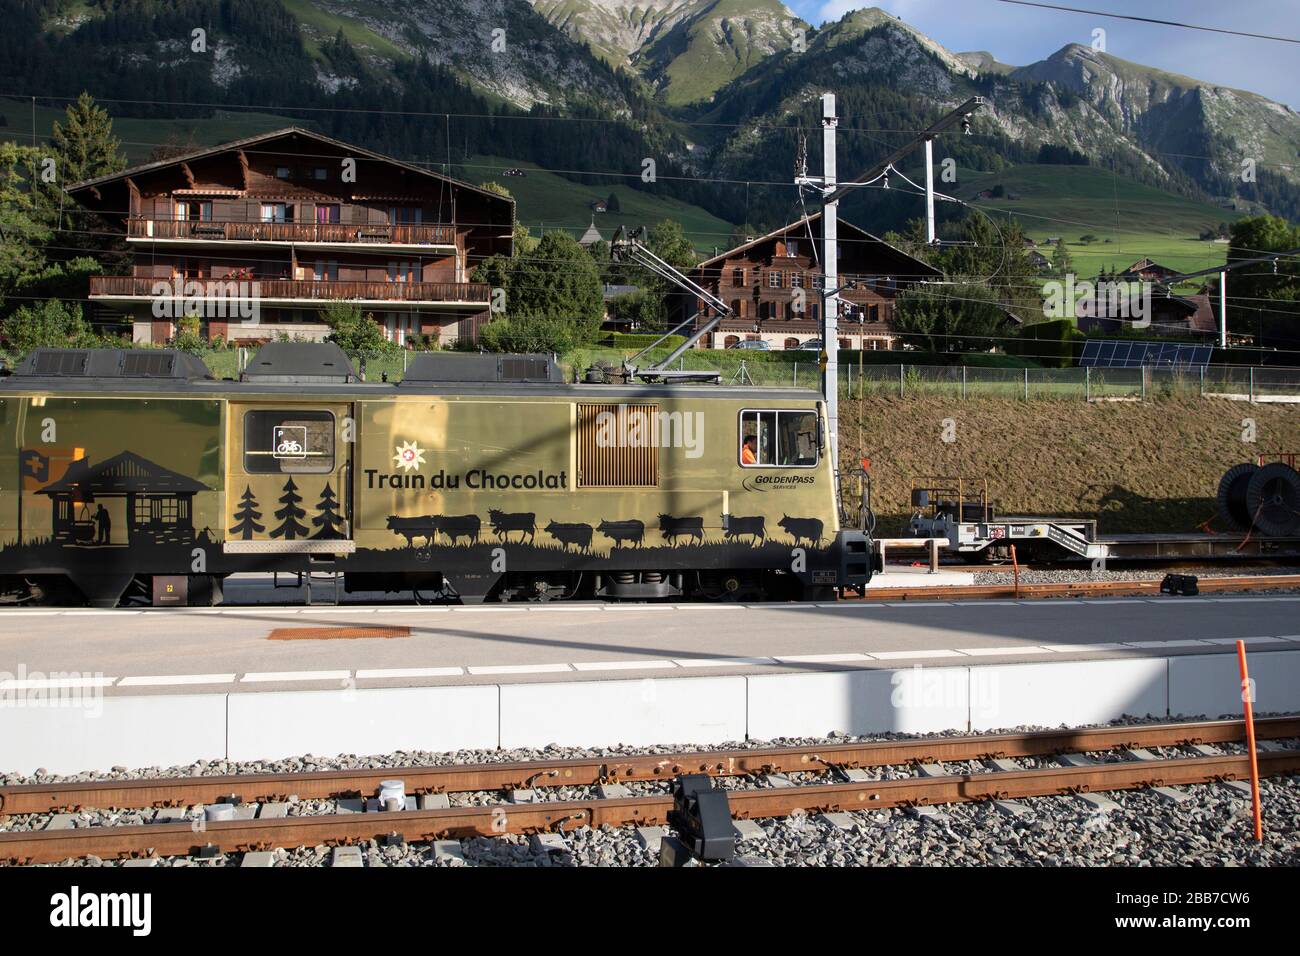 Chocolate Train Bulle, Gruyère in the canton of Fribourg, Switzerland, Europe, 08/09/2019, Chocolate Train Bulle, Train Du Chocolat ( Golden Pass serv Stock Photo